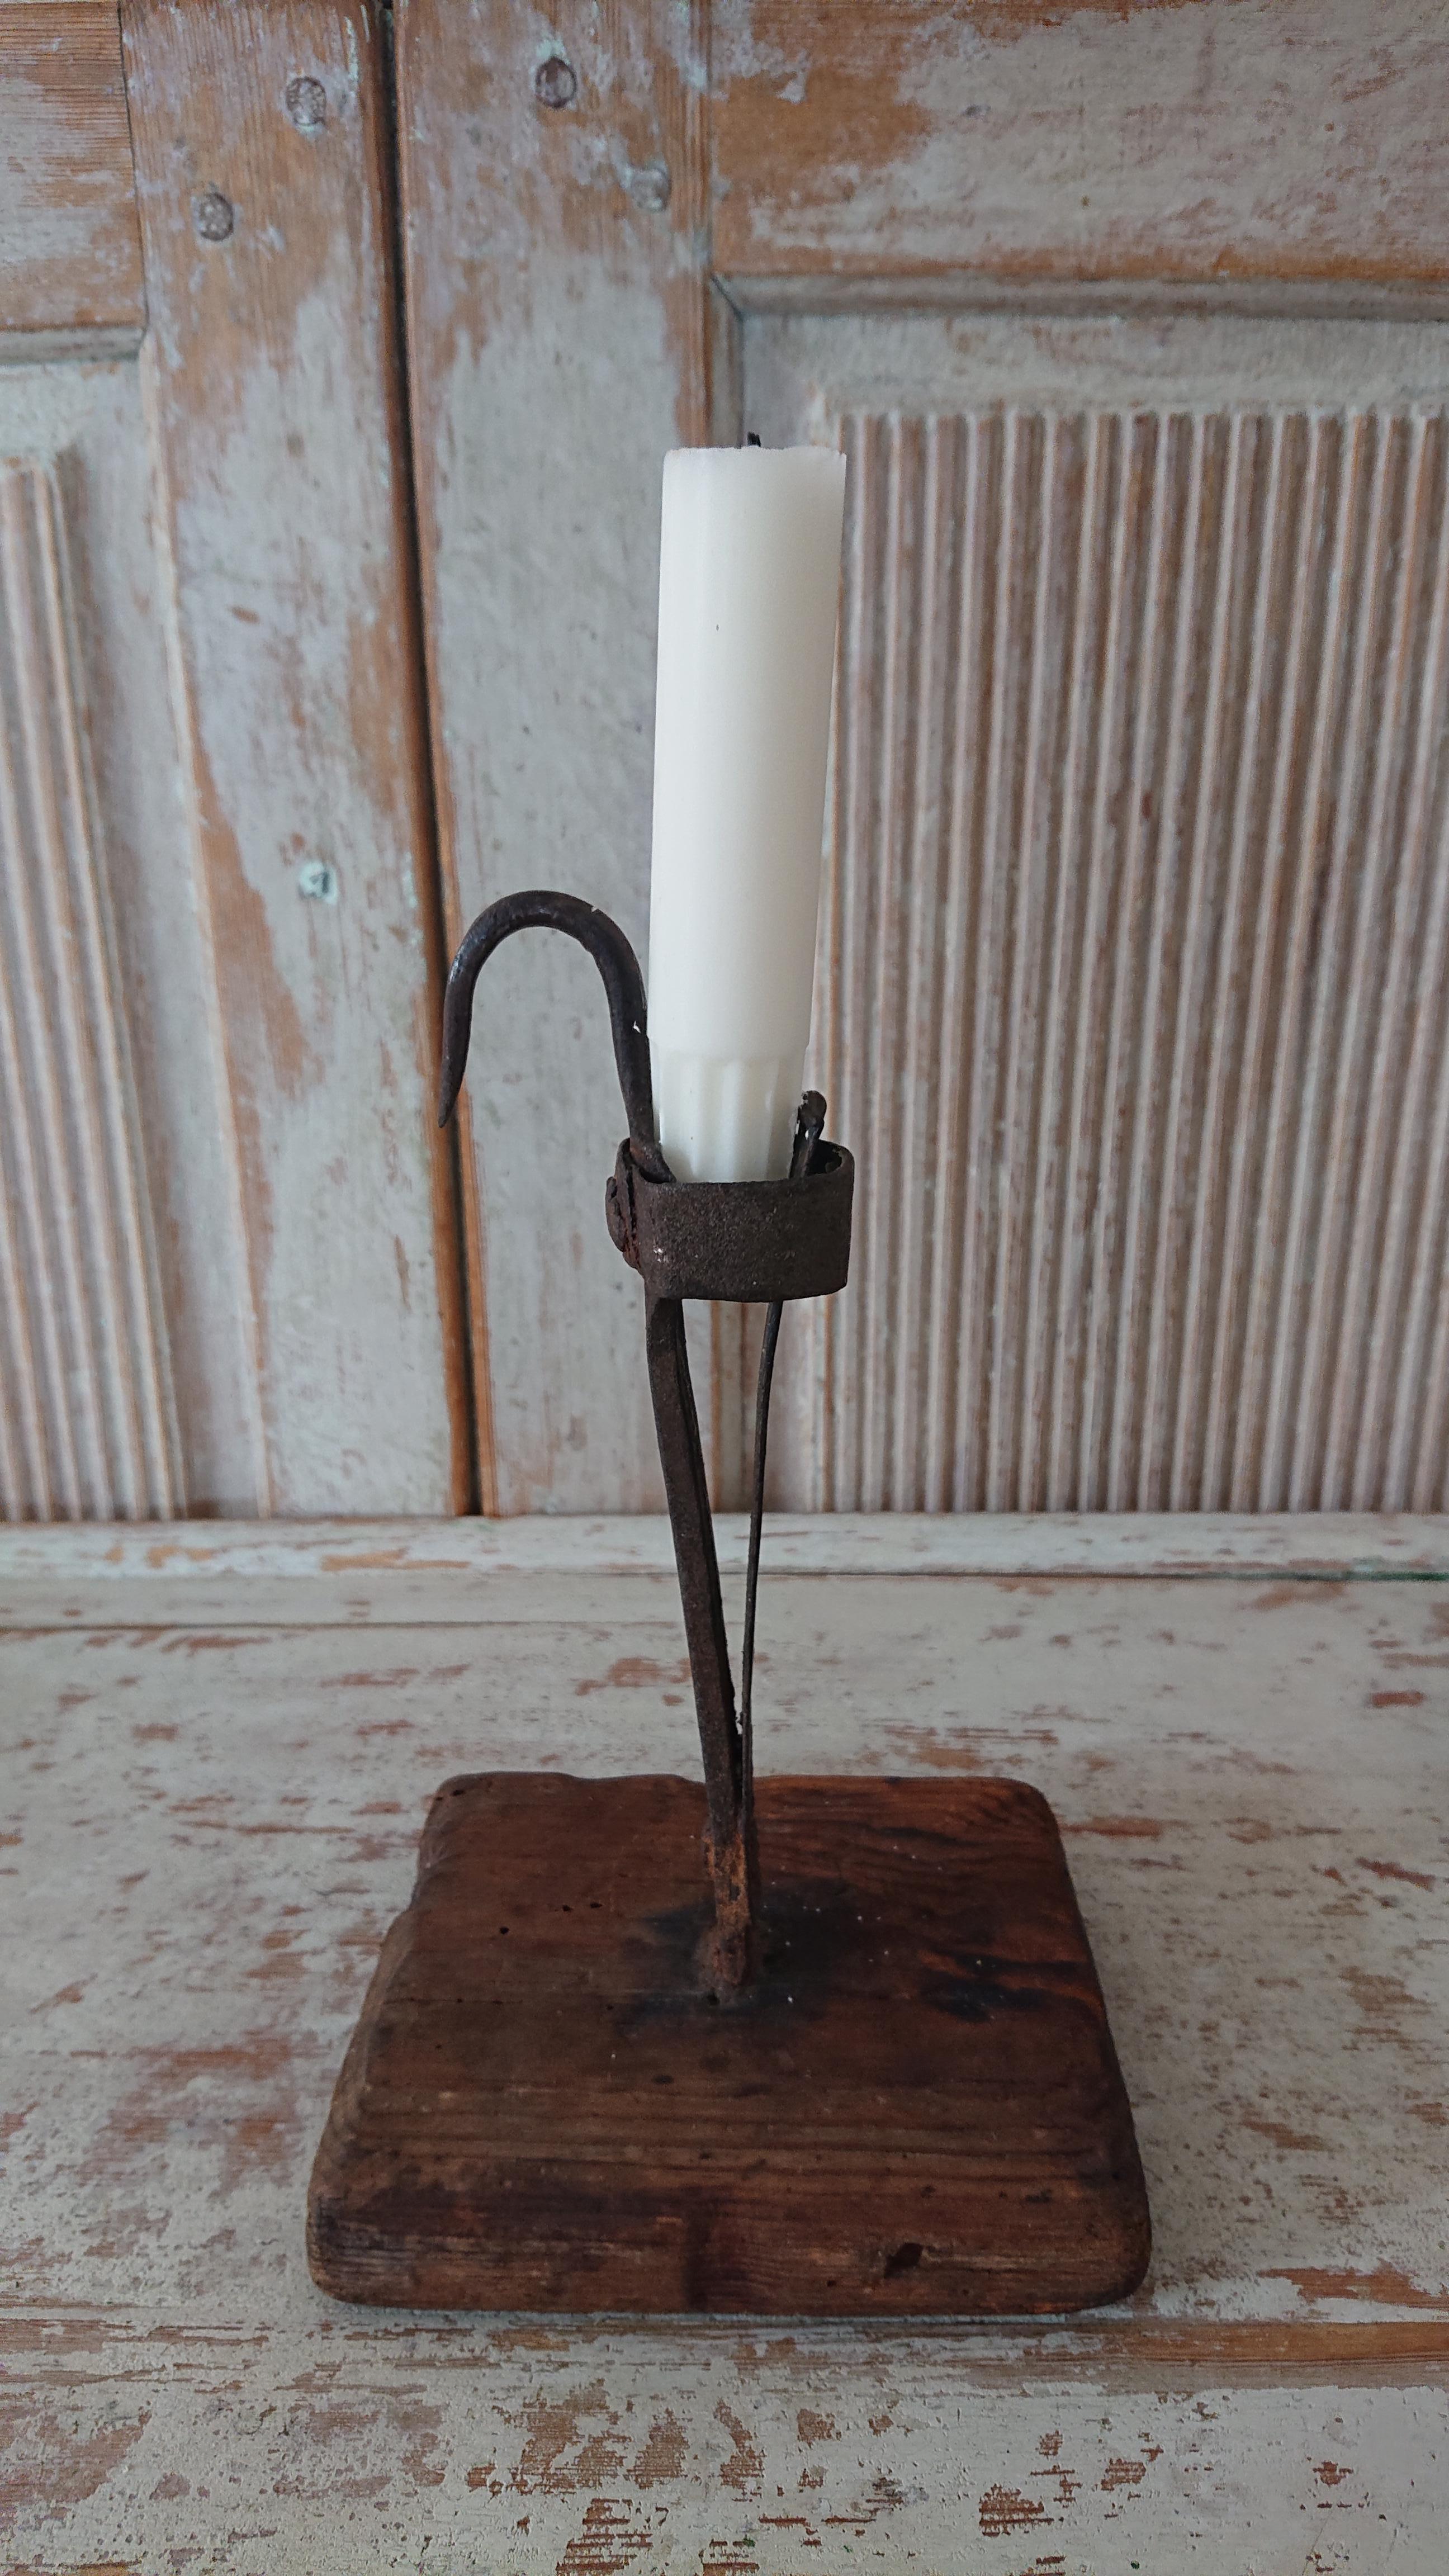 An old antique Swedish 18th century iron candlestick with the foot made of wood.
Very charming & solid.
This candlestick is called 